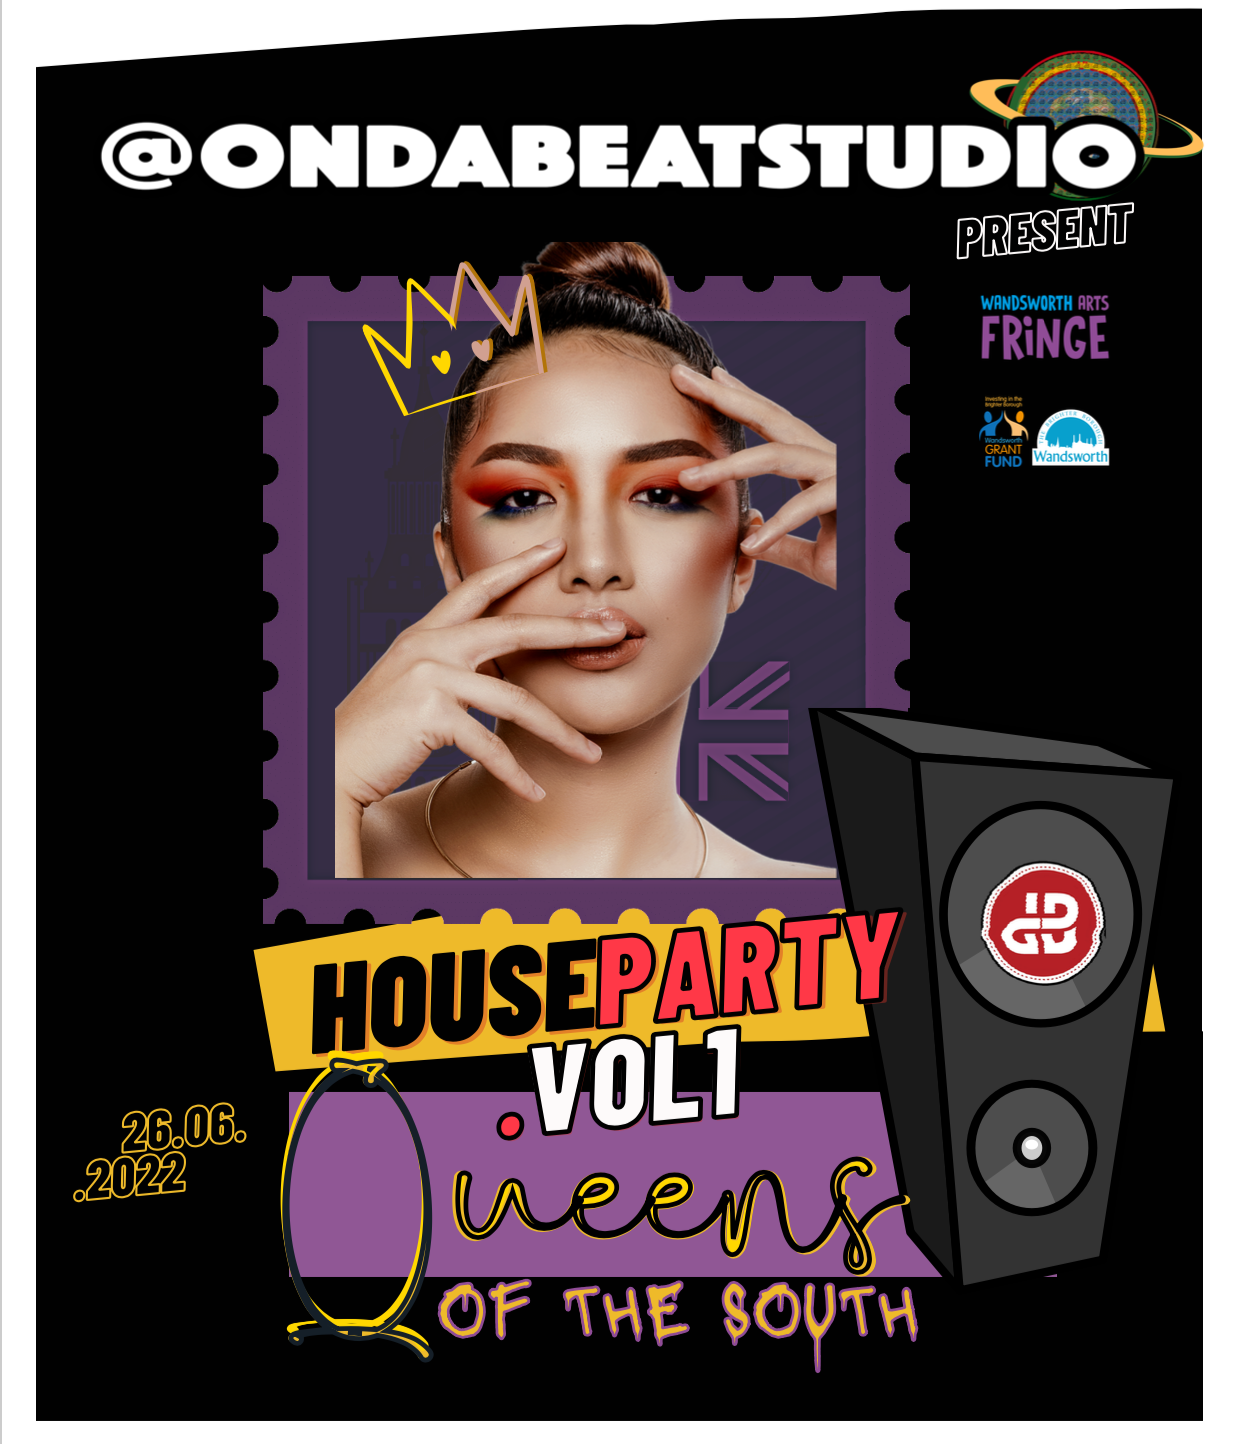 WAF - 10—26 JUNE 2022 flyer poster ondabeat studio houseparty Southern flavours Queens of the south